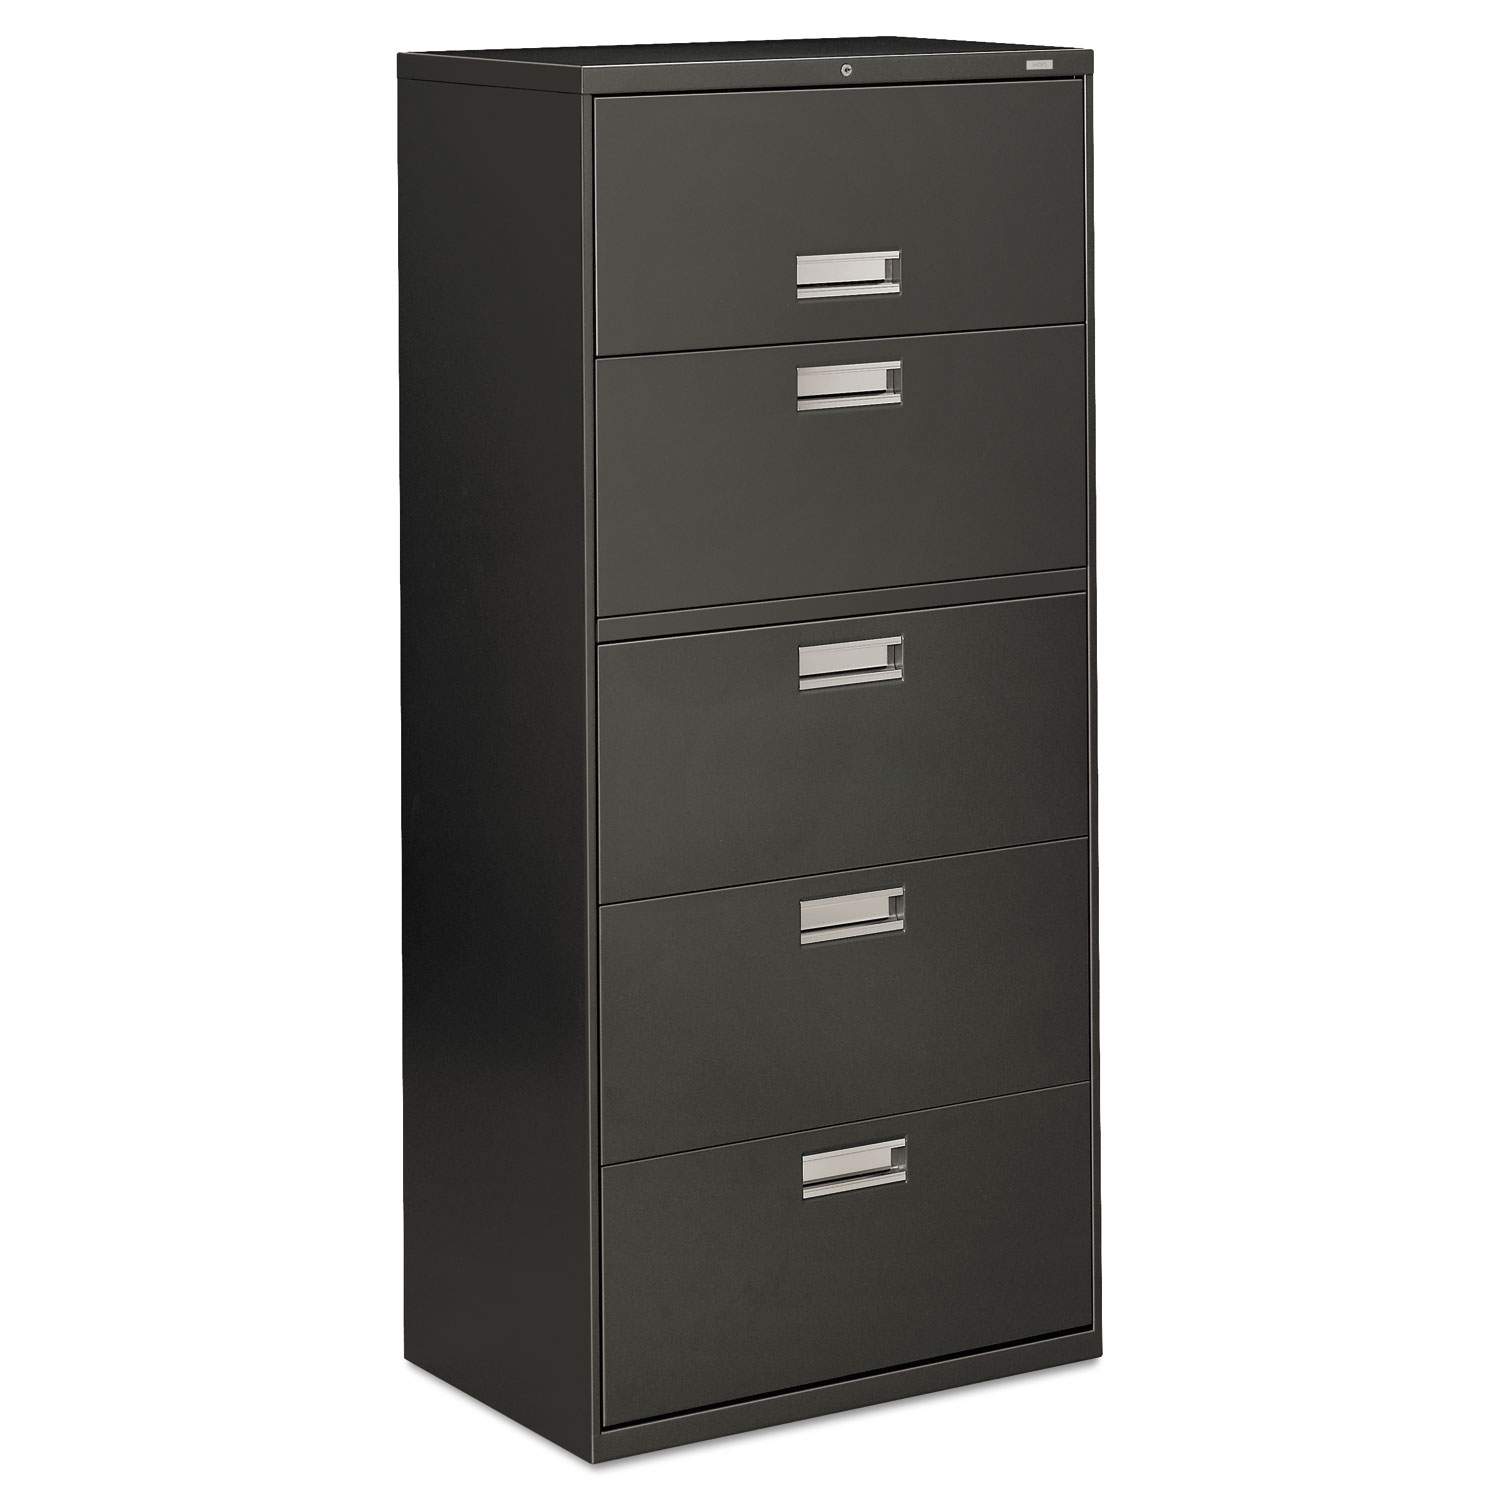  HON H675.L.S 600 Series Five-Drawer Lateral File, 30w x 18d x 64.25h, Charcoal (HON675LS) 